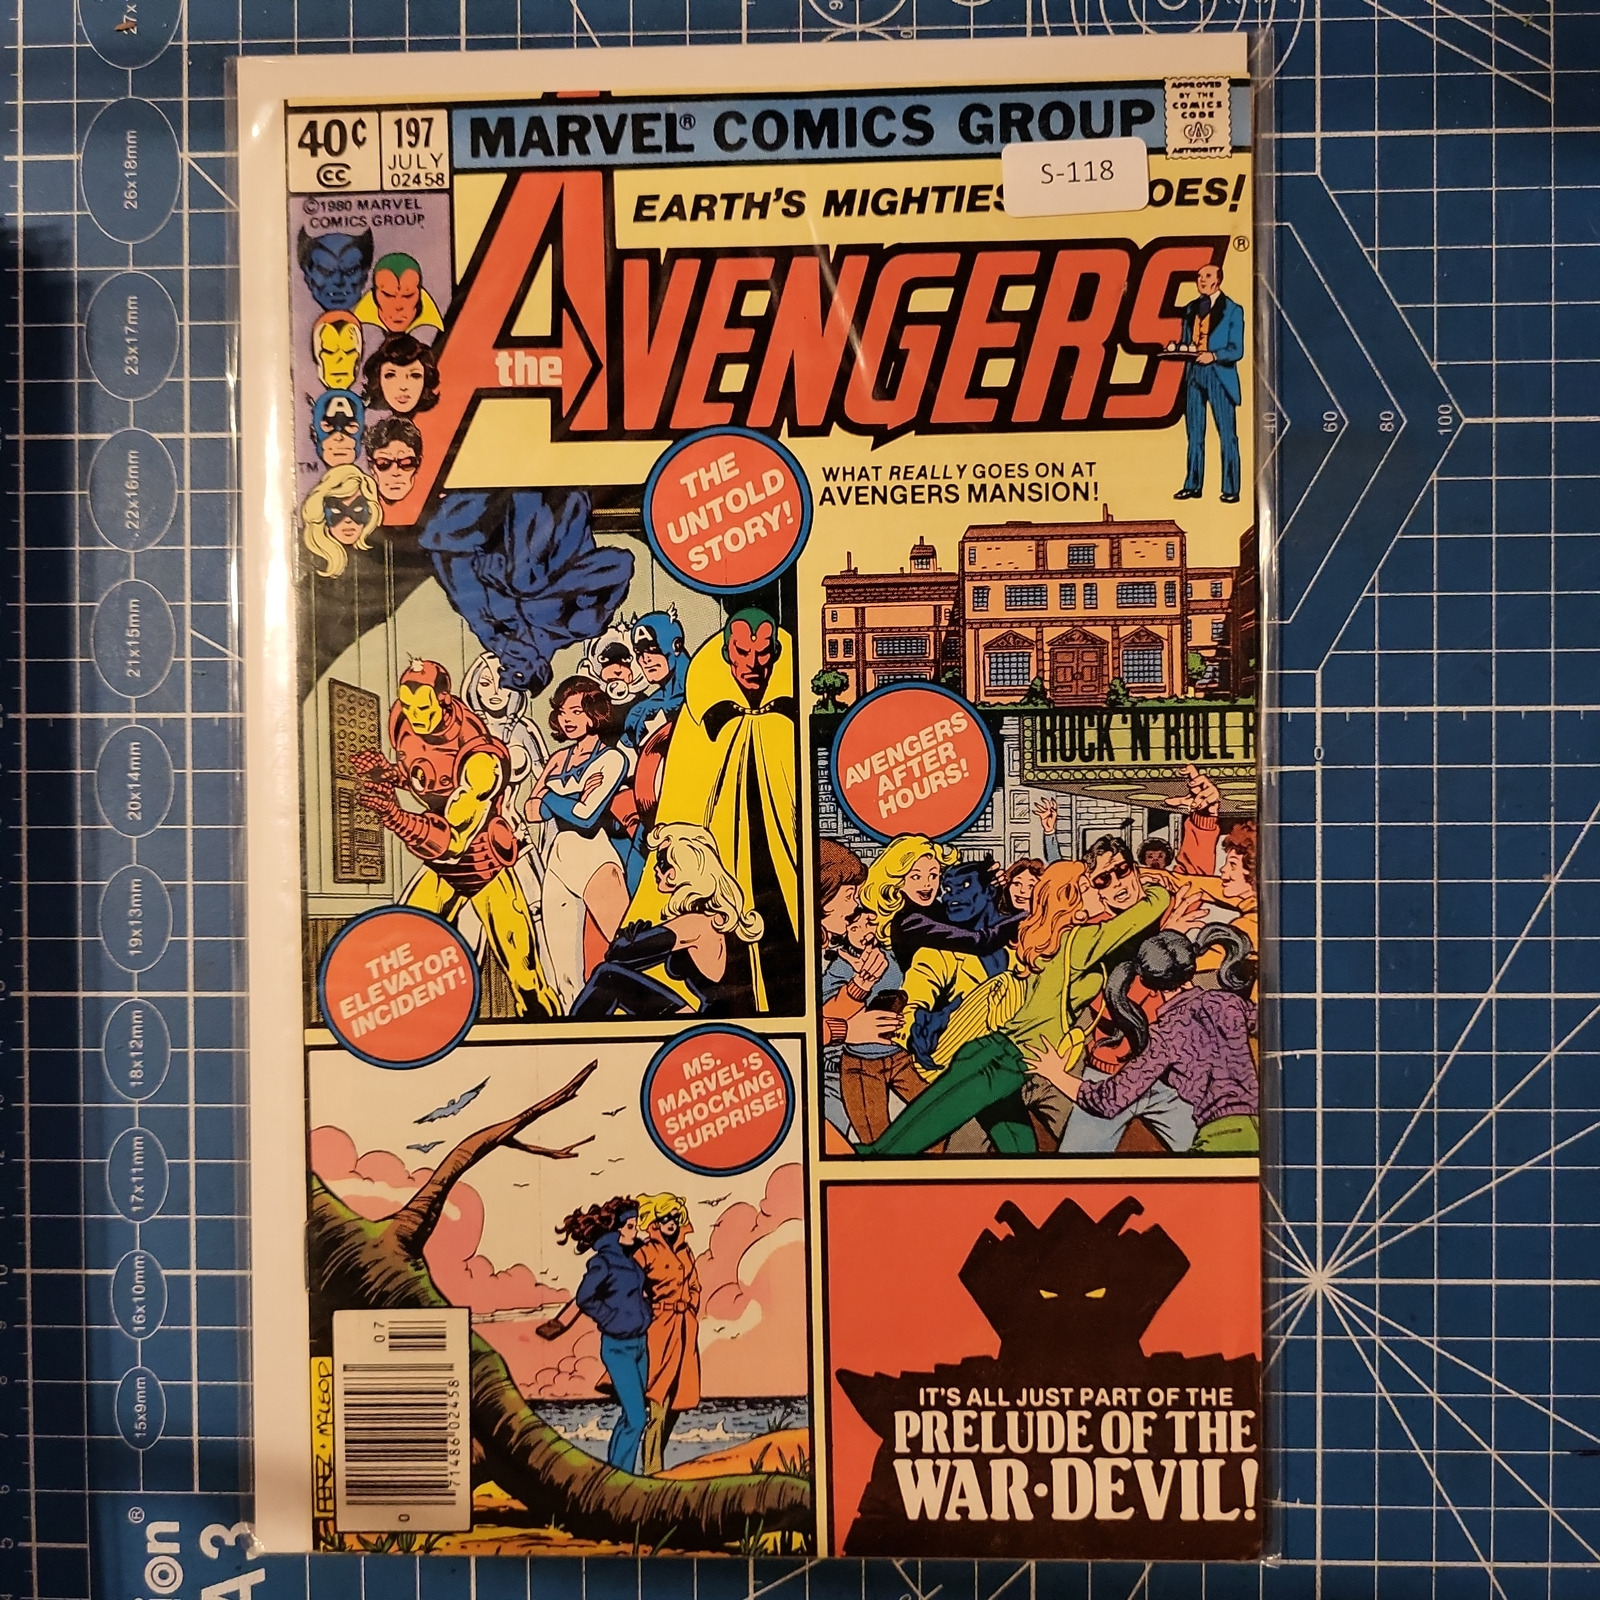 AVENGERS #197 VOL. 1 5.5 TO 6.5 NEWSSTAND MARVEL COMIC BOOK S-118